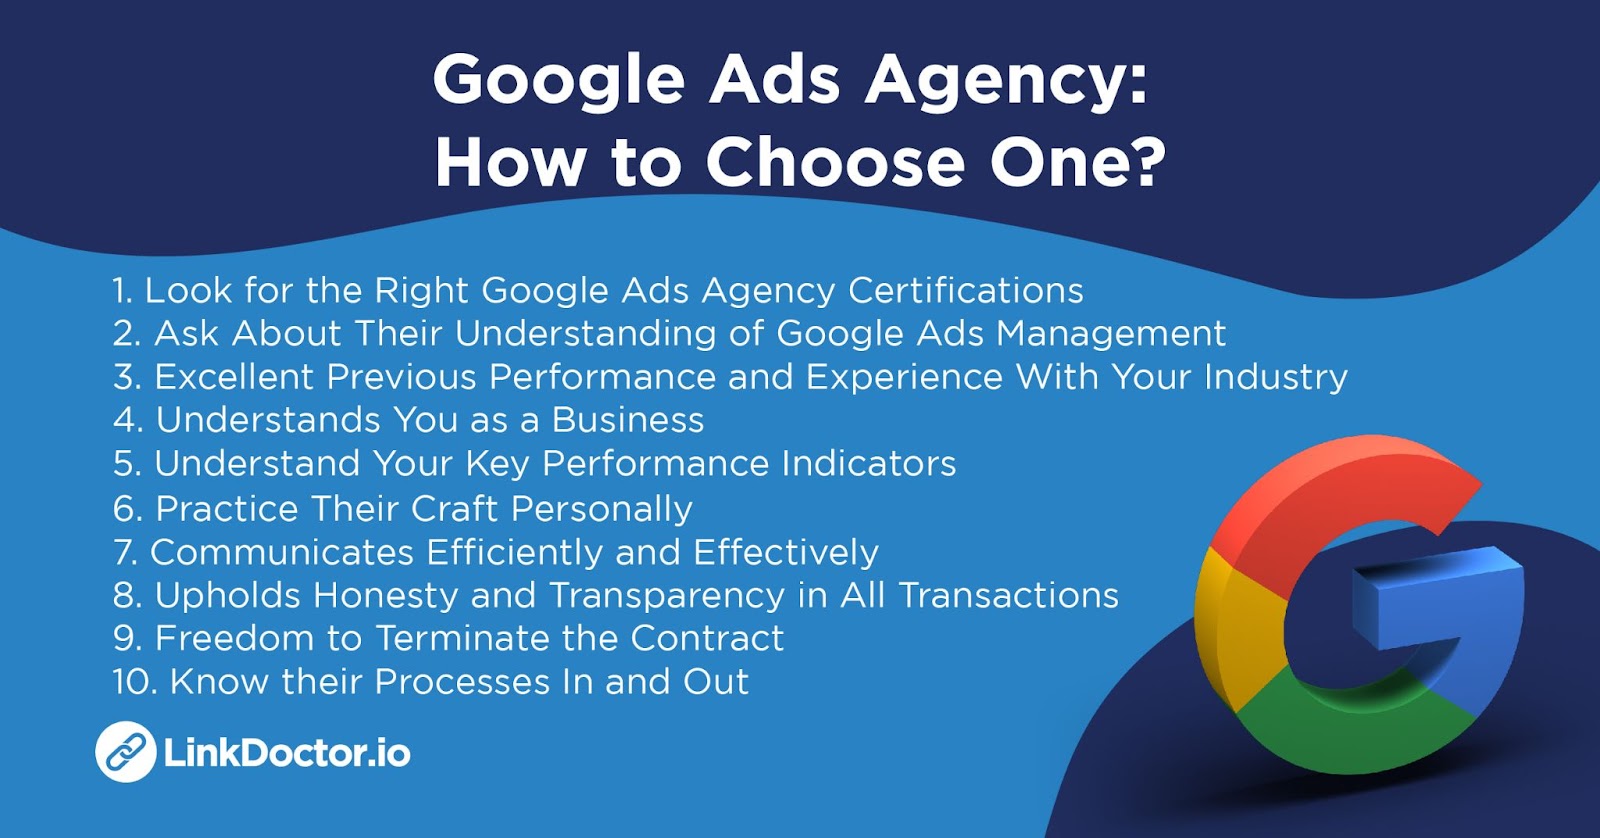 Summary of Google Ads Agency: How to Choose One?